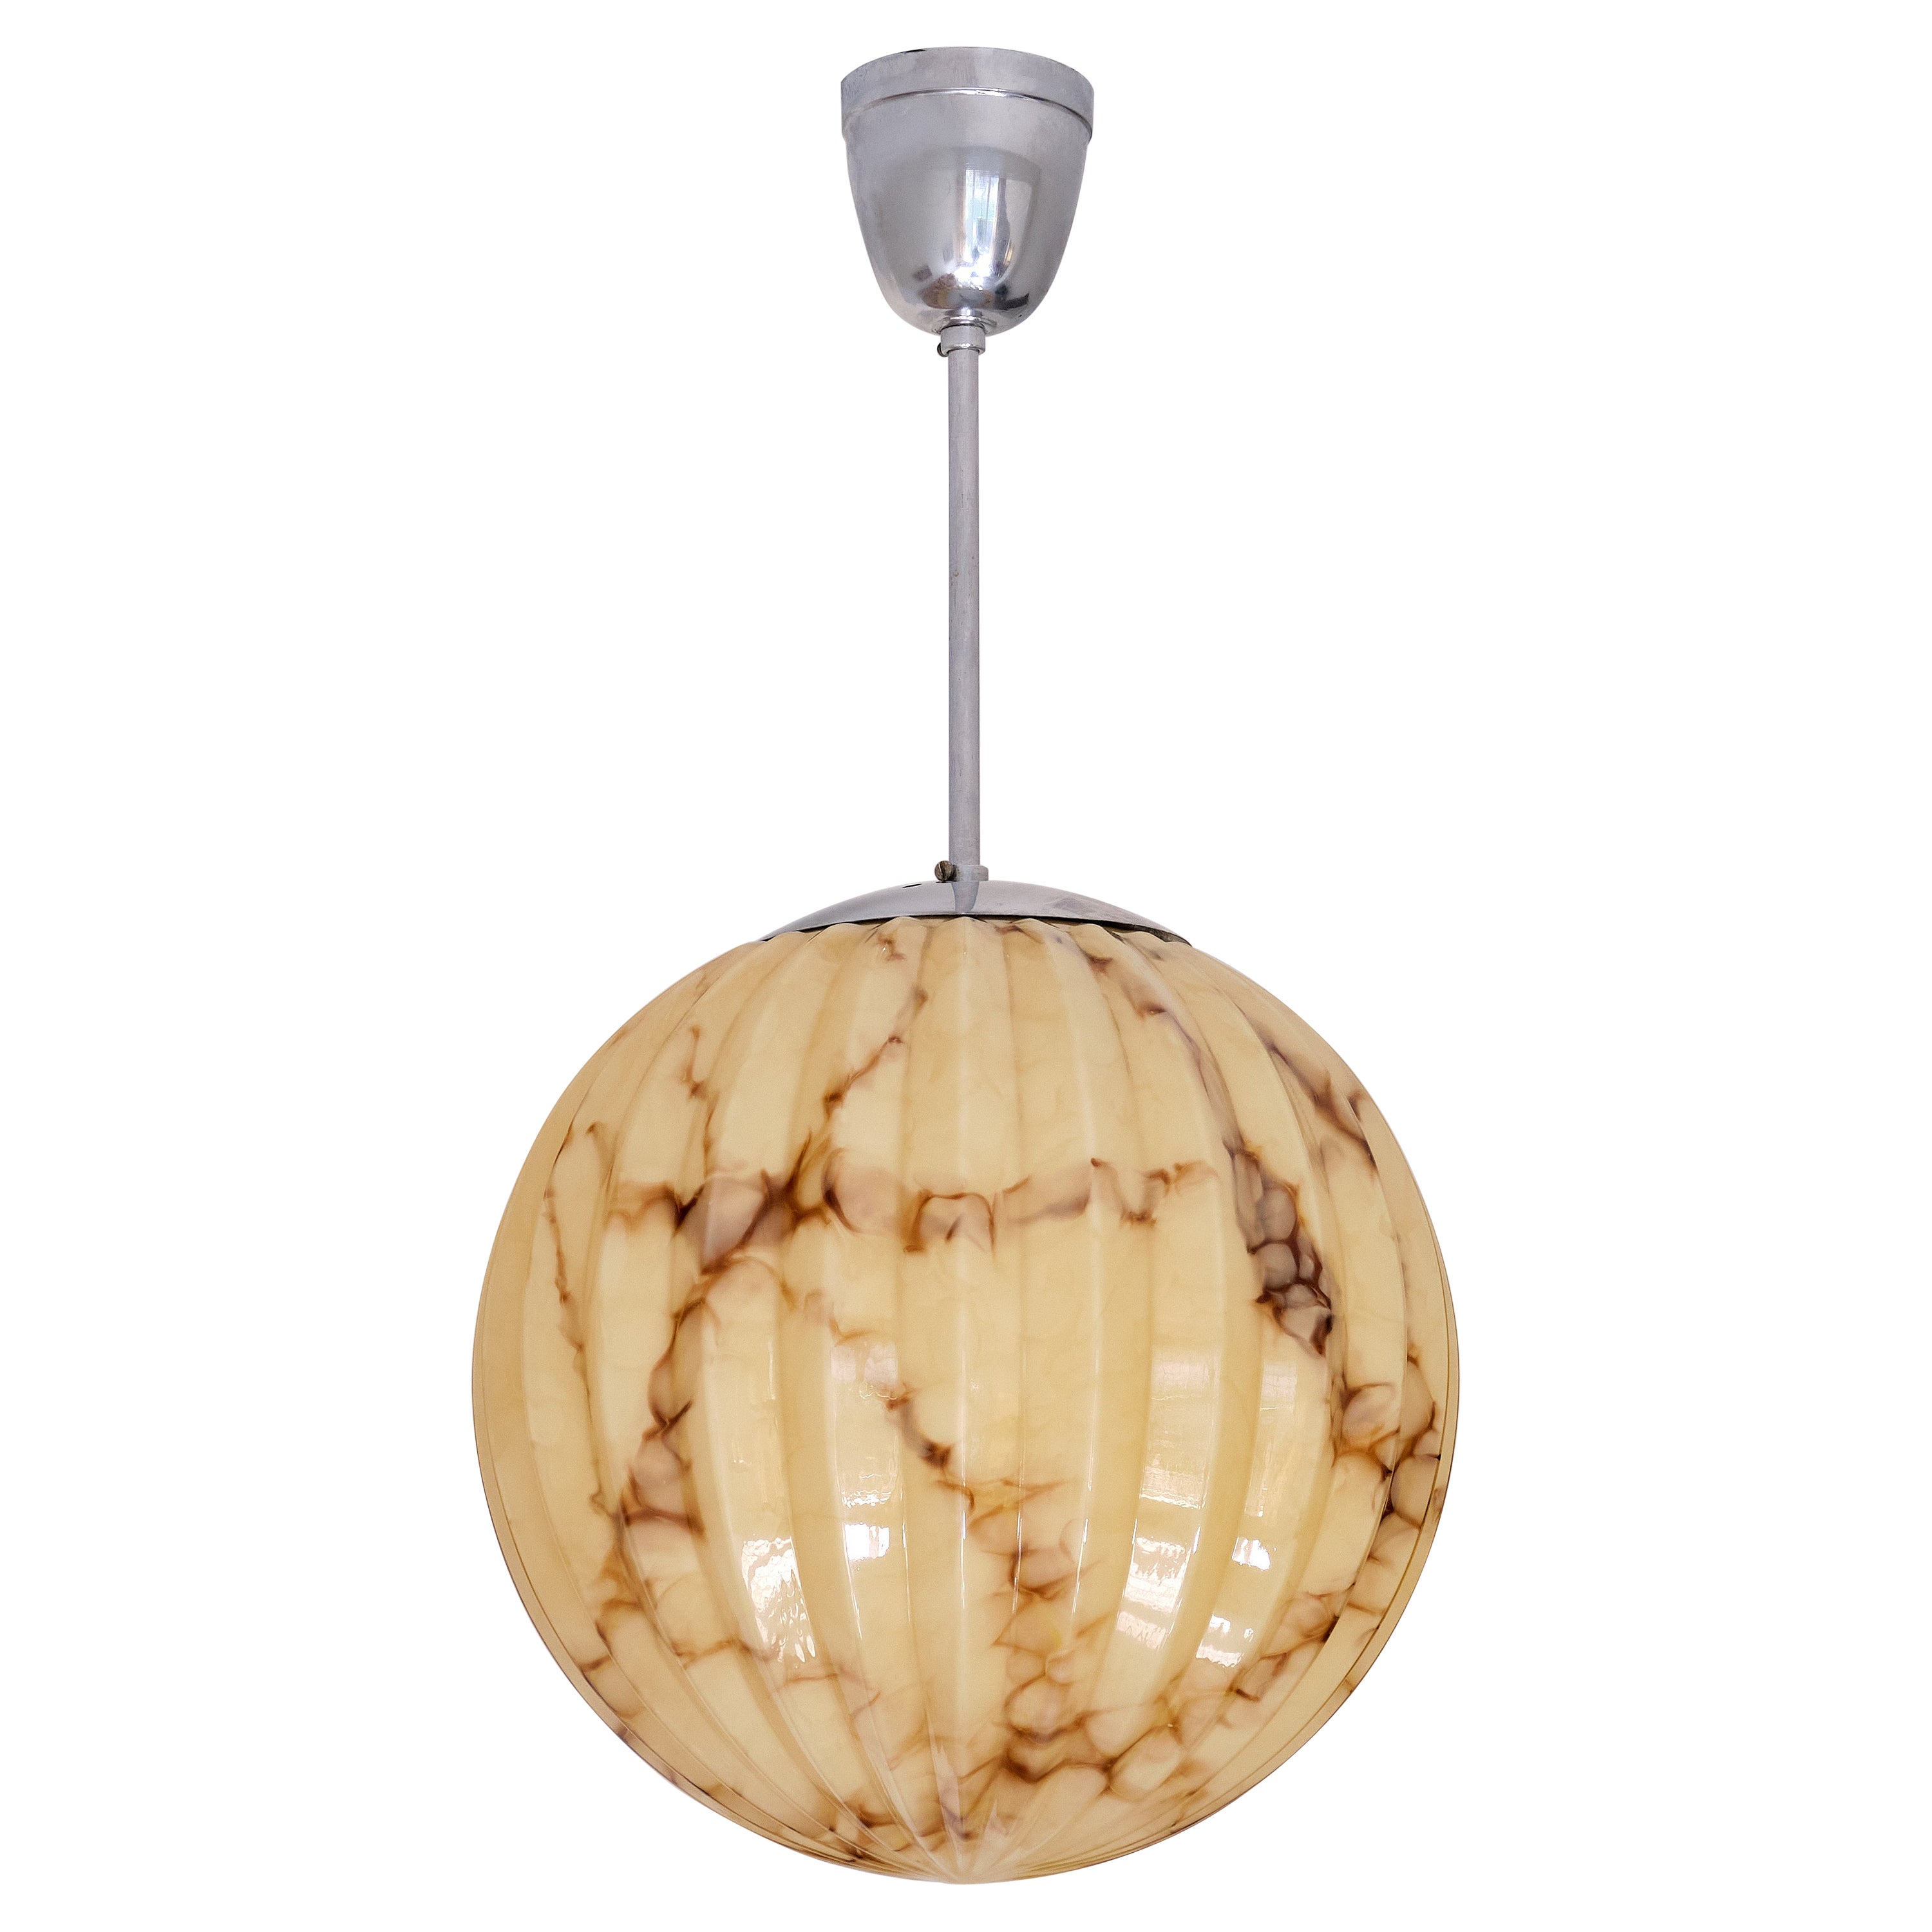 Swedish Art Deco Pendant Light in Ribbed, Marbled Glass and Nickel, 1930s